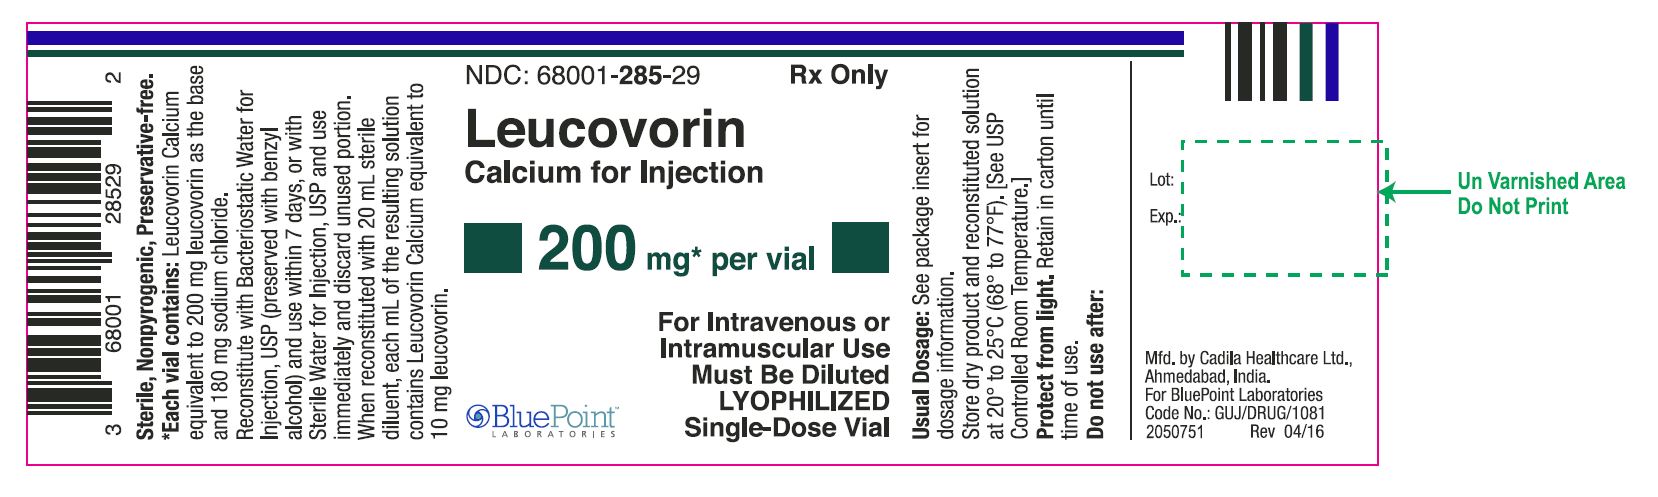 Leucovorin Calcium for Injection 200mg vial label